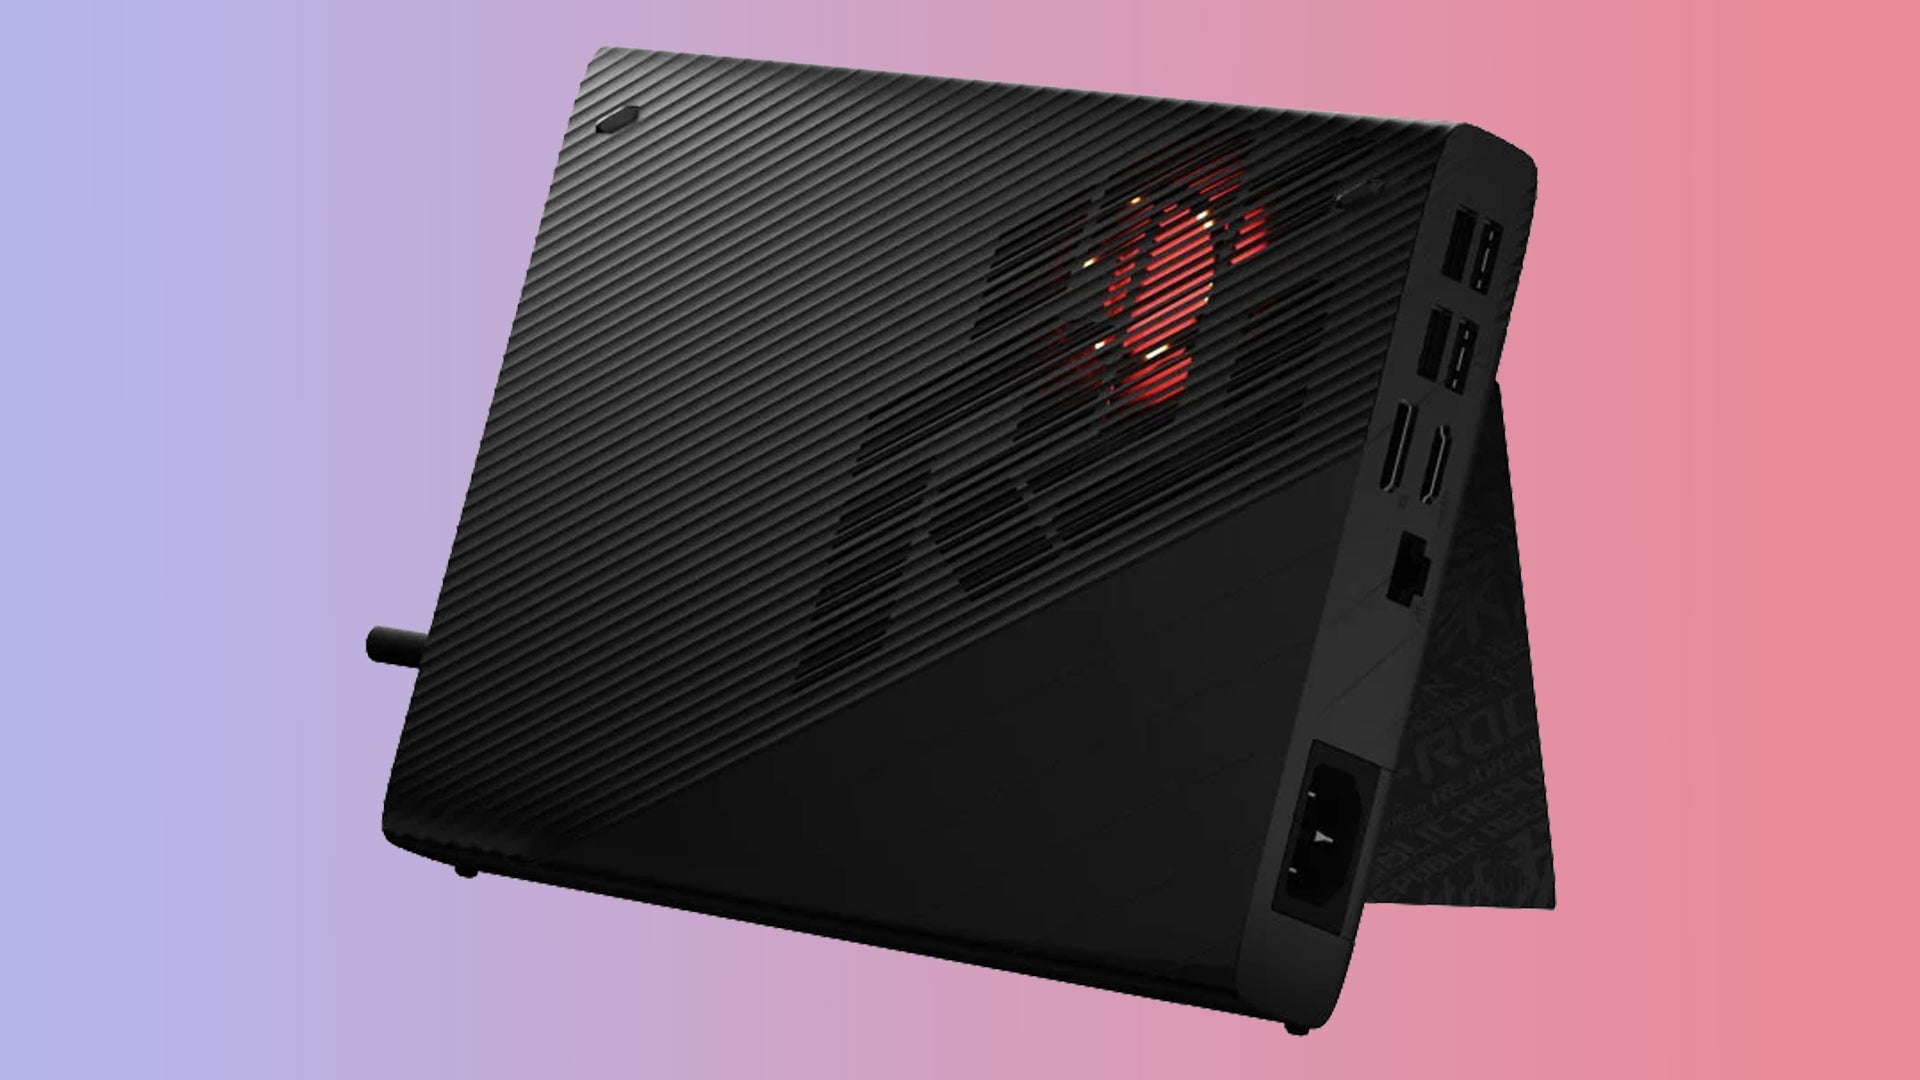 This Asus dock adds a powerful GPU and more ports to your ROG 